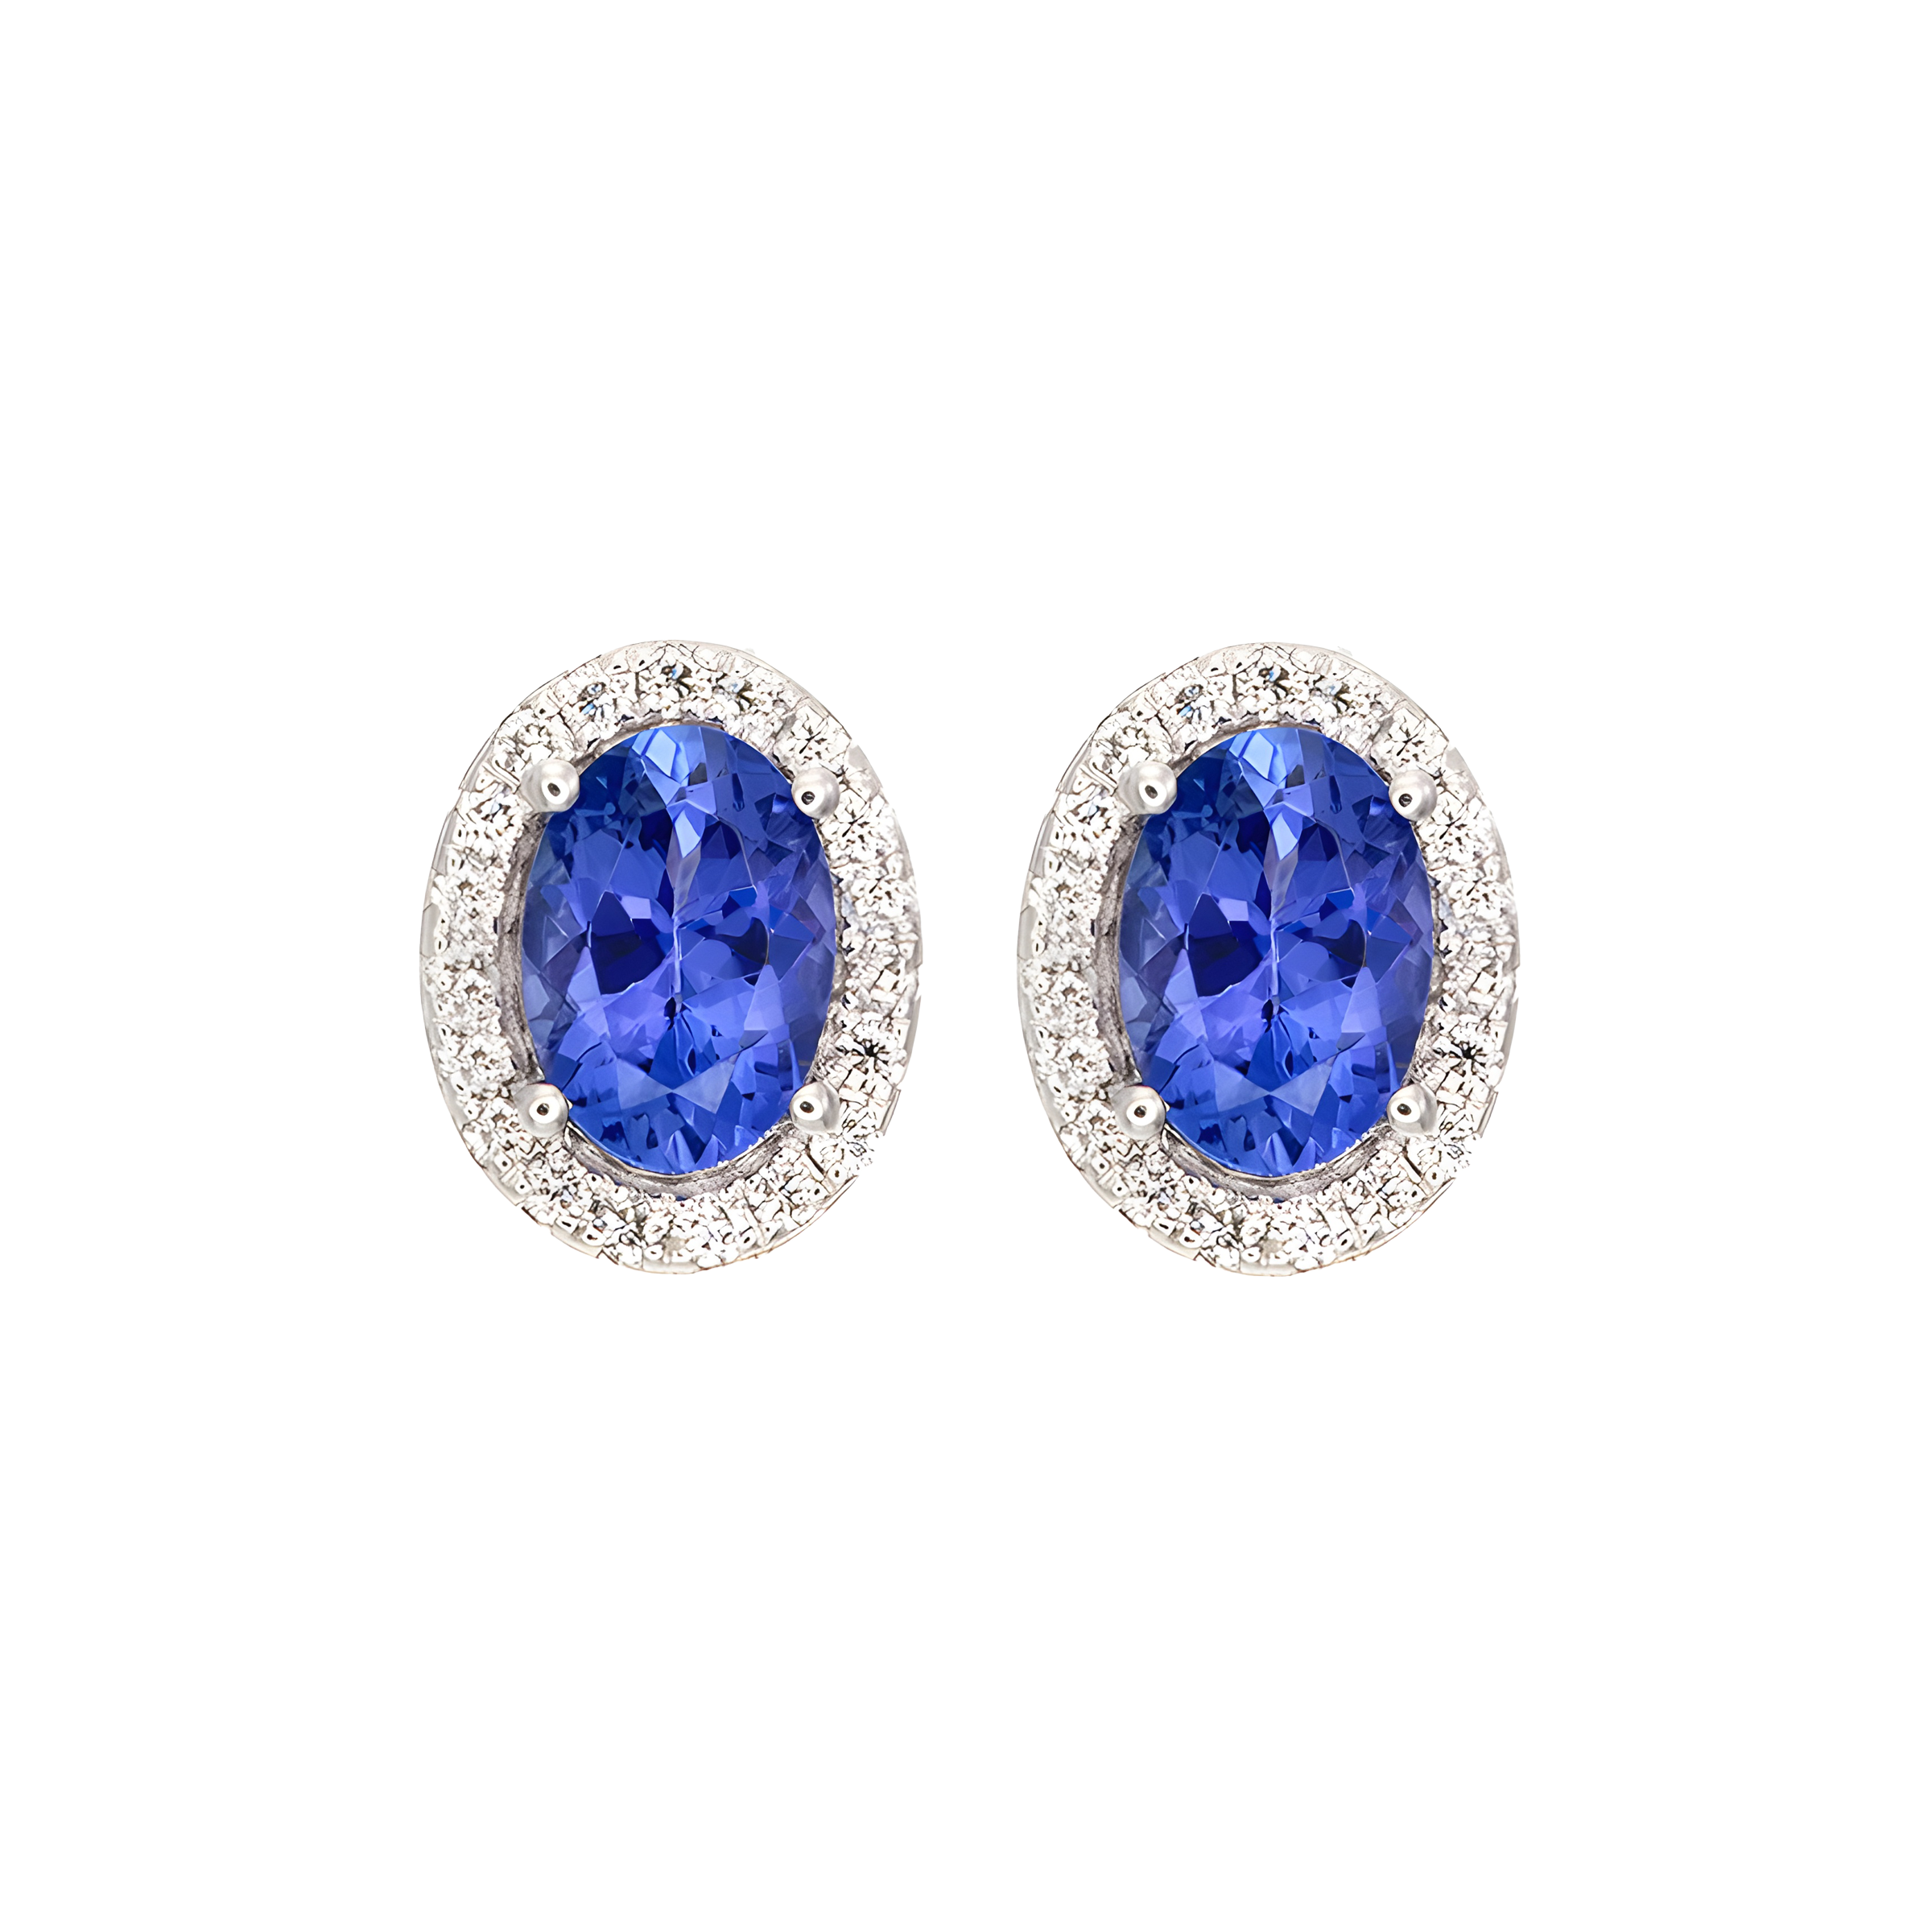 Oval Tanzanite and Diamond Halo Stud Earrings in 18k White Gold